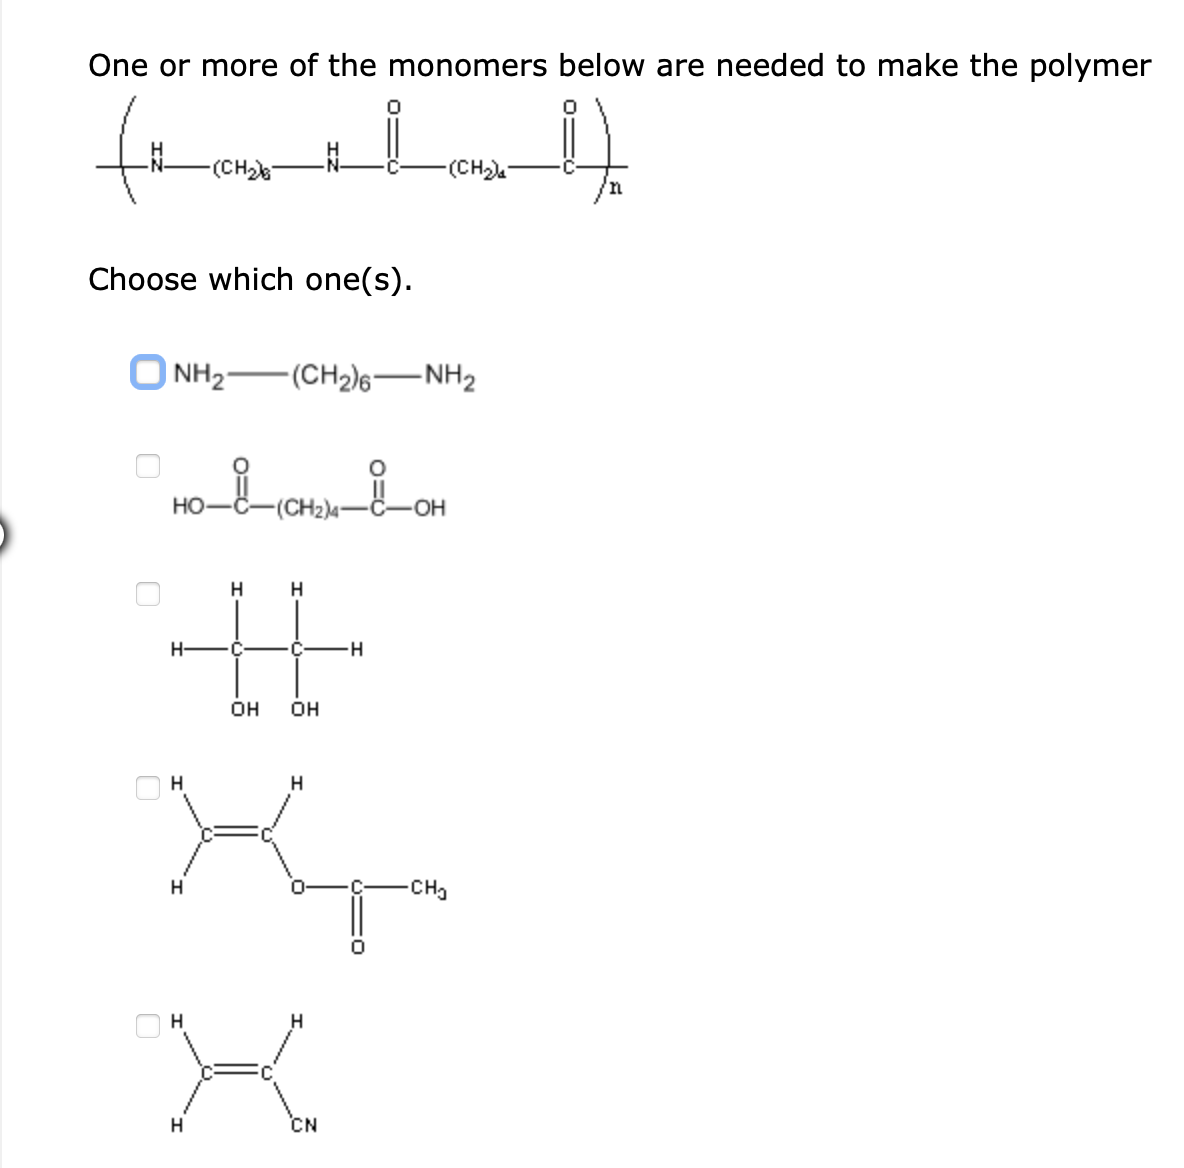 One or more of the monomers below are needed to make the polymer
to
(CH)
-(CH)
Choose which one(s).
| NH2
-(CH2)6–NH2
HO-C-(CH2)4-C-OH
H
H
H-
OH
OH
H
H
H
-CH3
H
H
H
CN
